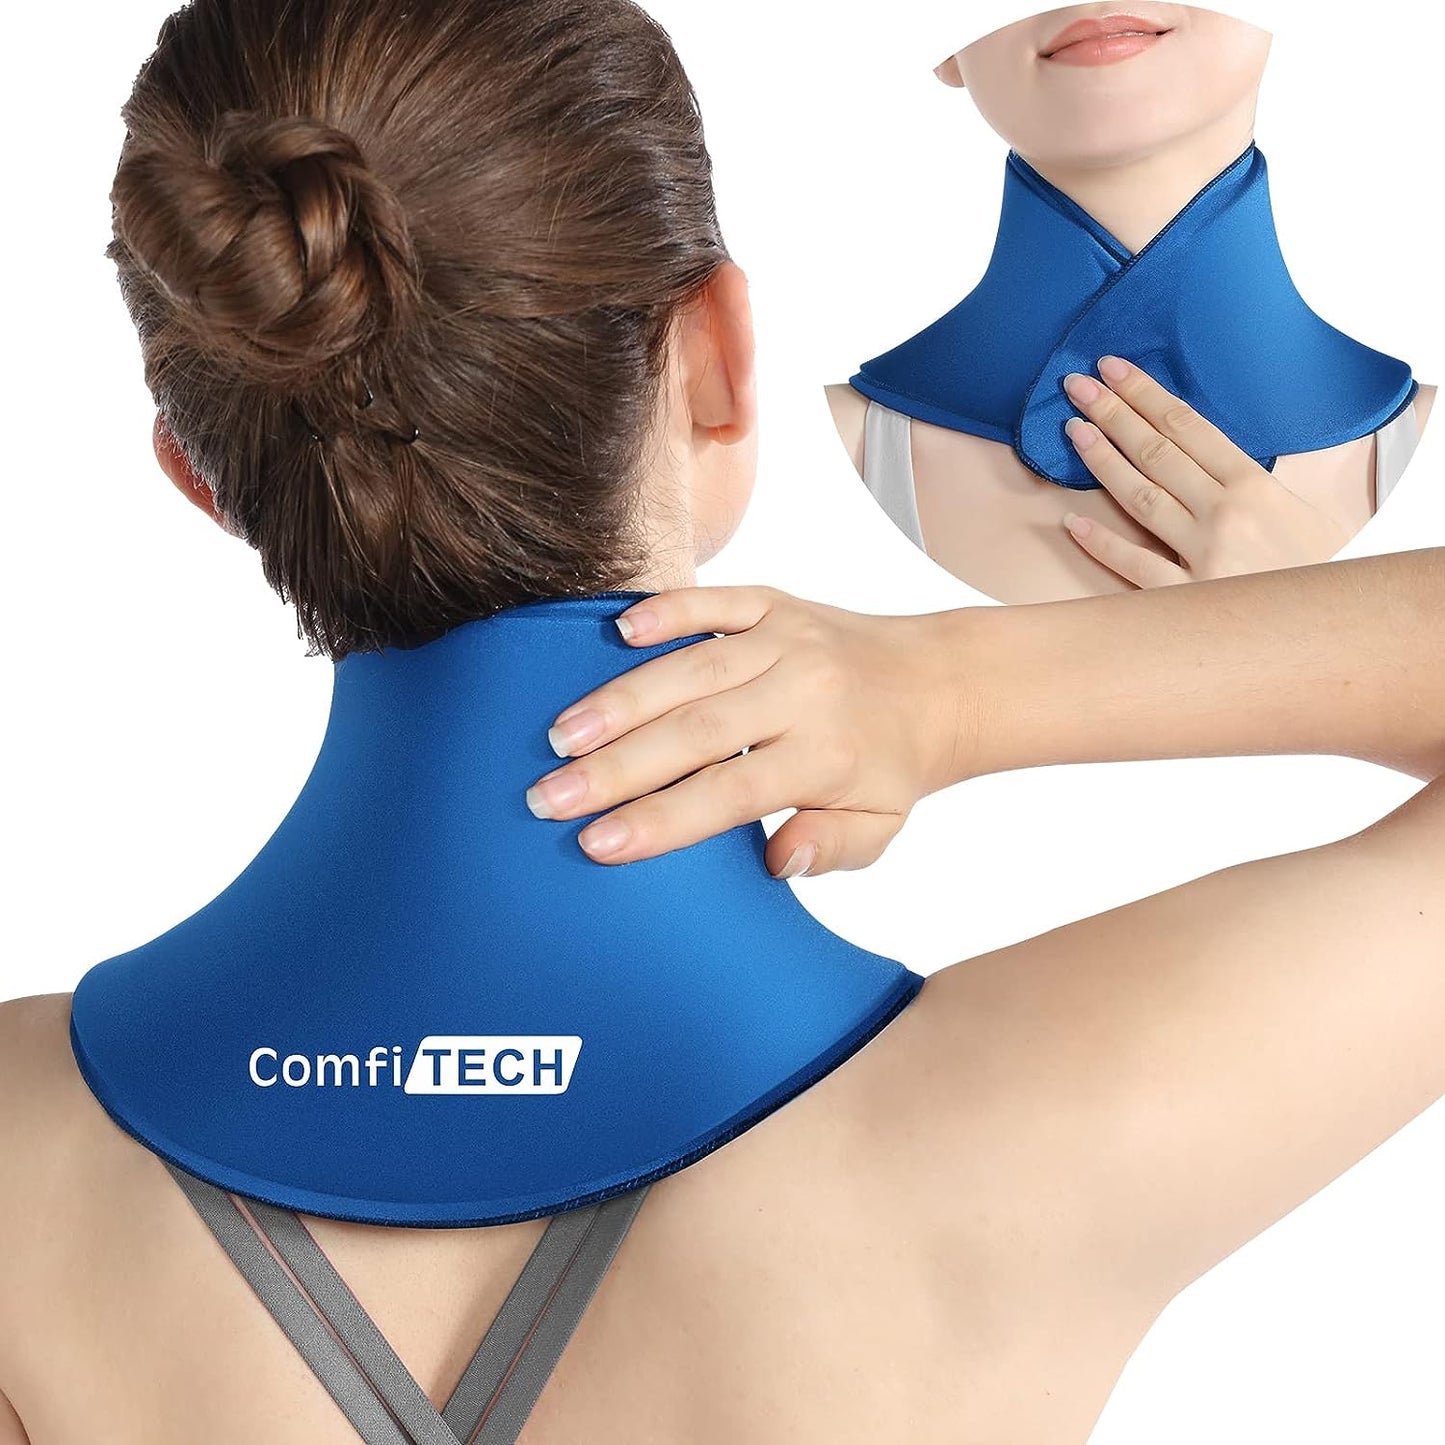 Neck Ice Pack Wrap Gel Reusable Ice Packs for Neck Pain Relief, Cervical Cold Compress Ice Pack for Sports Injuries, Swelling, Office Neck Pressure and Cervical Surgery Recovery (Black)